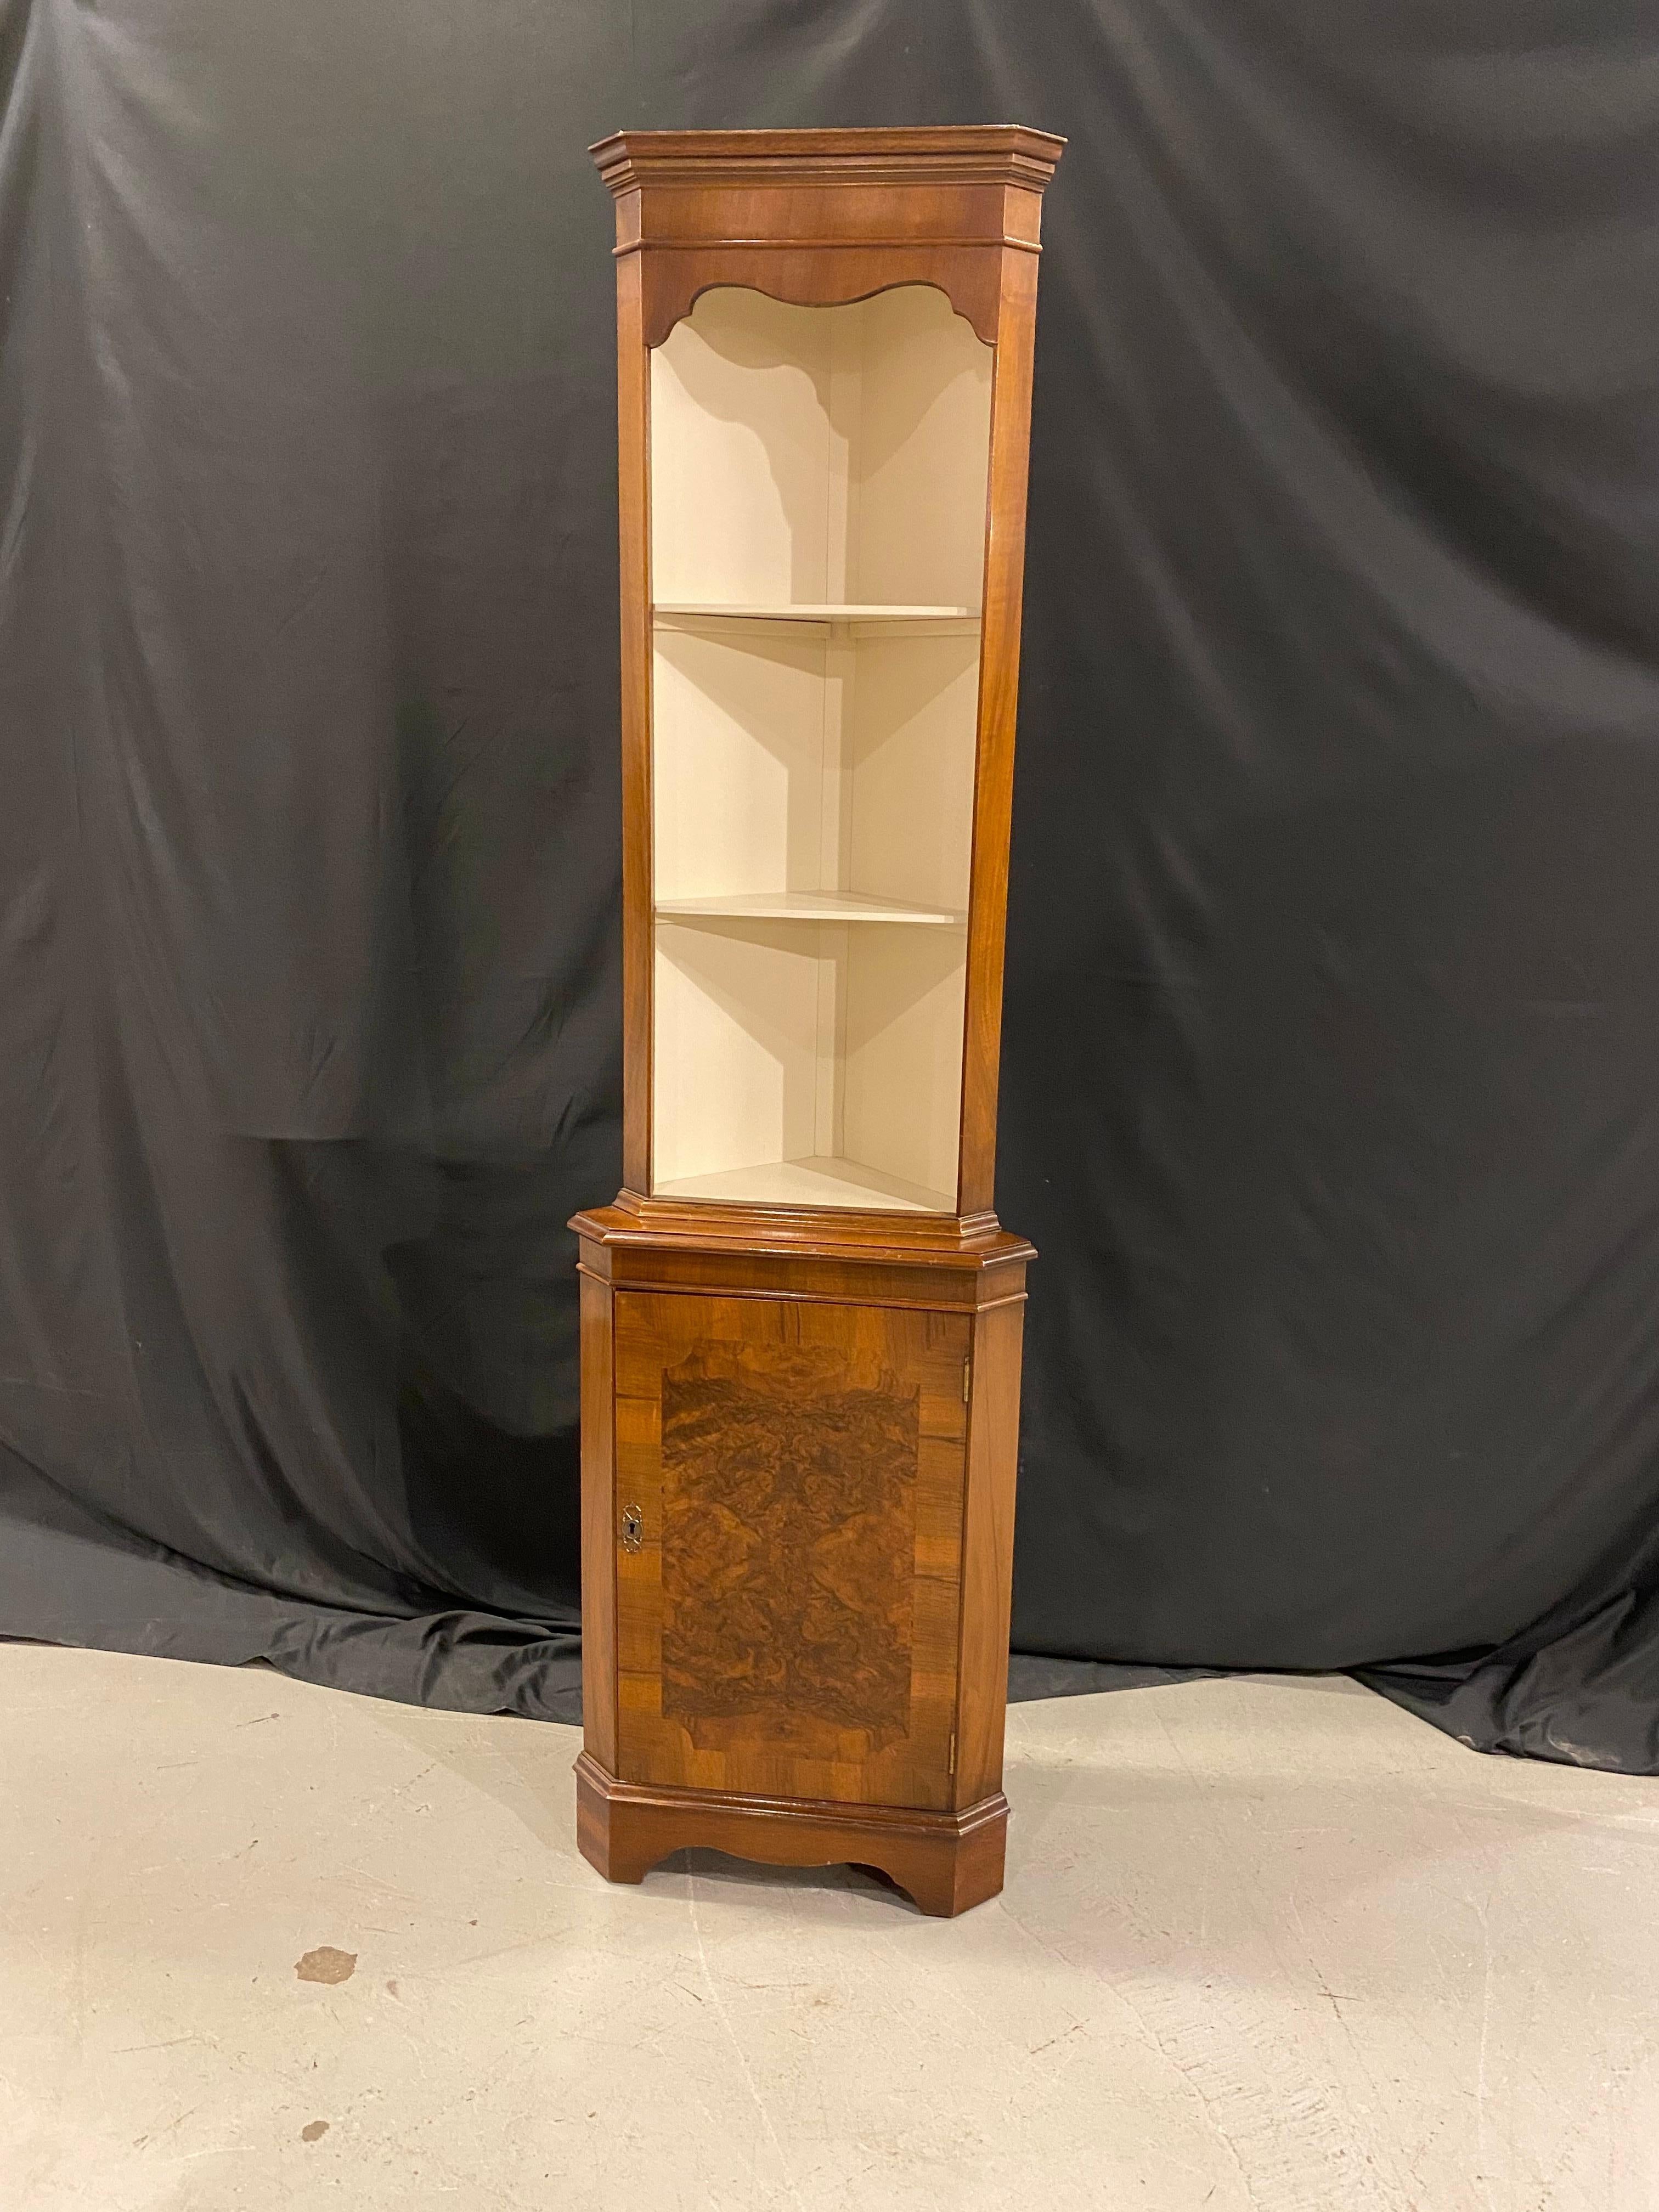 This dainty little open face corner cabinet in the 18th century styling was made in England by one of Britain's better known cabinet shops. Bevan Funnel made this cabinet in mahogany with a walnut burr center panel in the face of the lower door. The